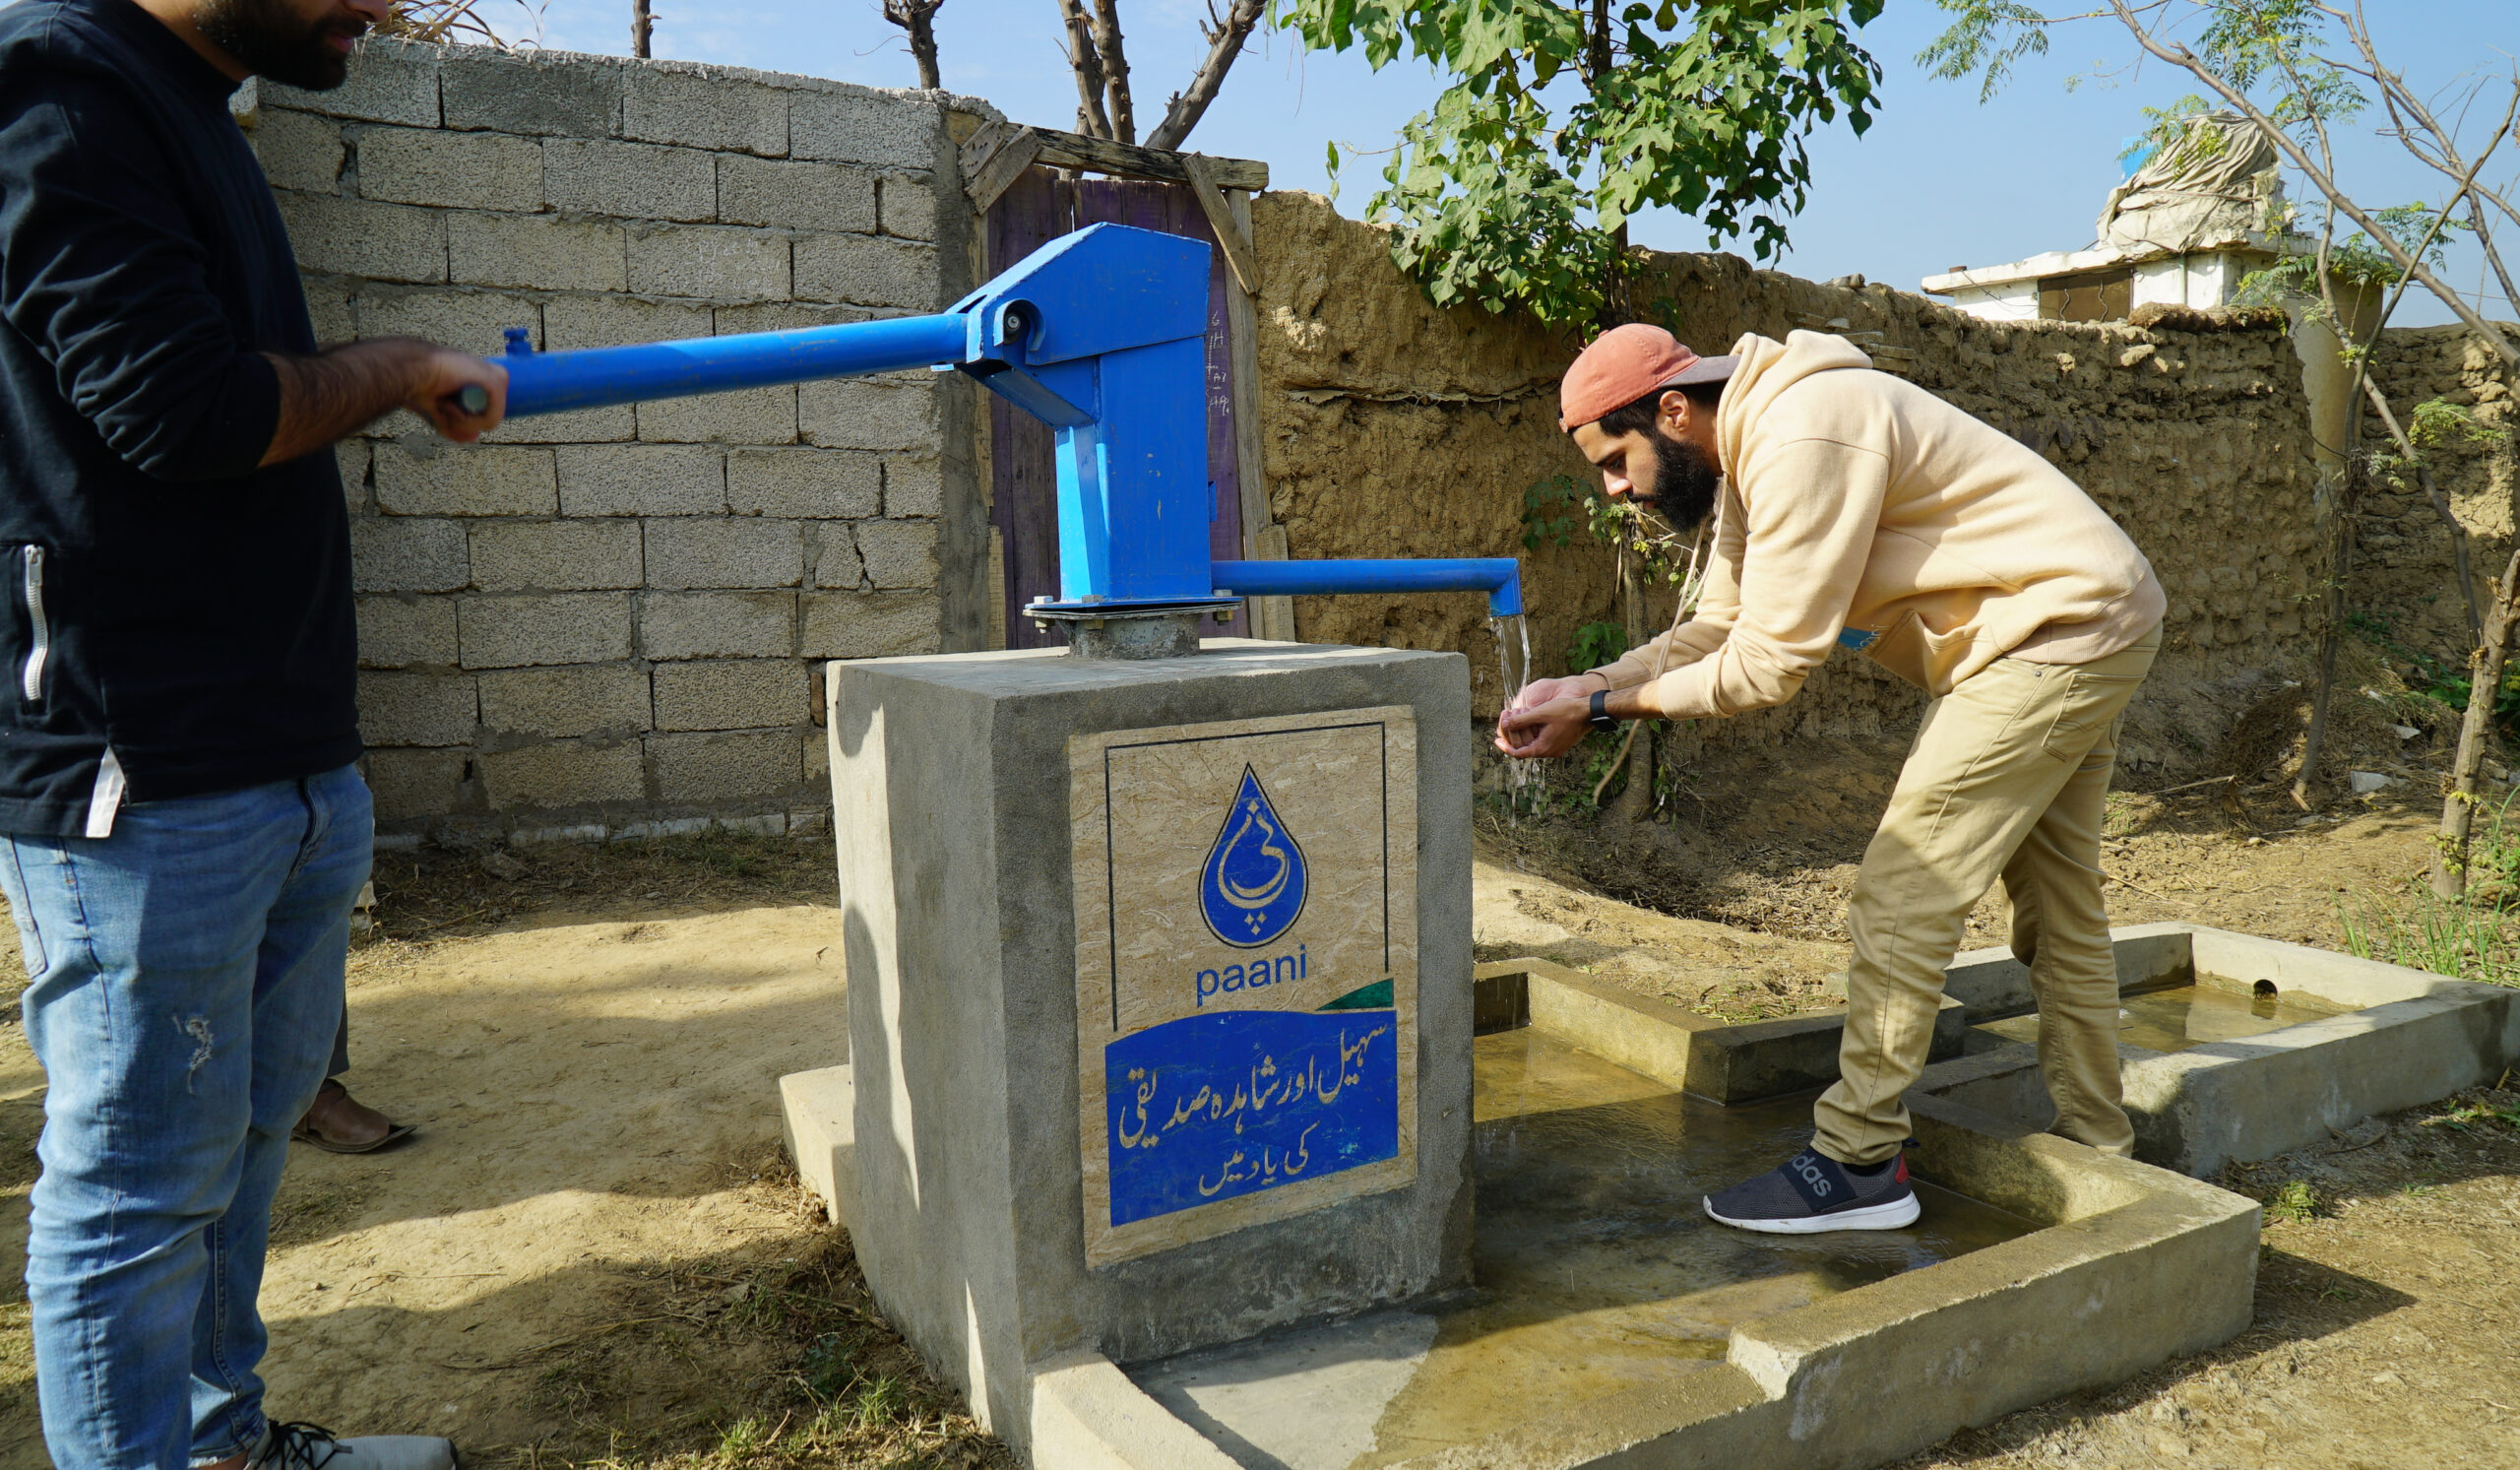 A person in jeans and a dark shirt pumps a Paani water well while a person in tan pants and a pan hoodie cups his hands at the other end of the well.